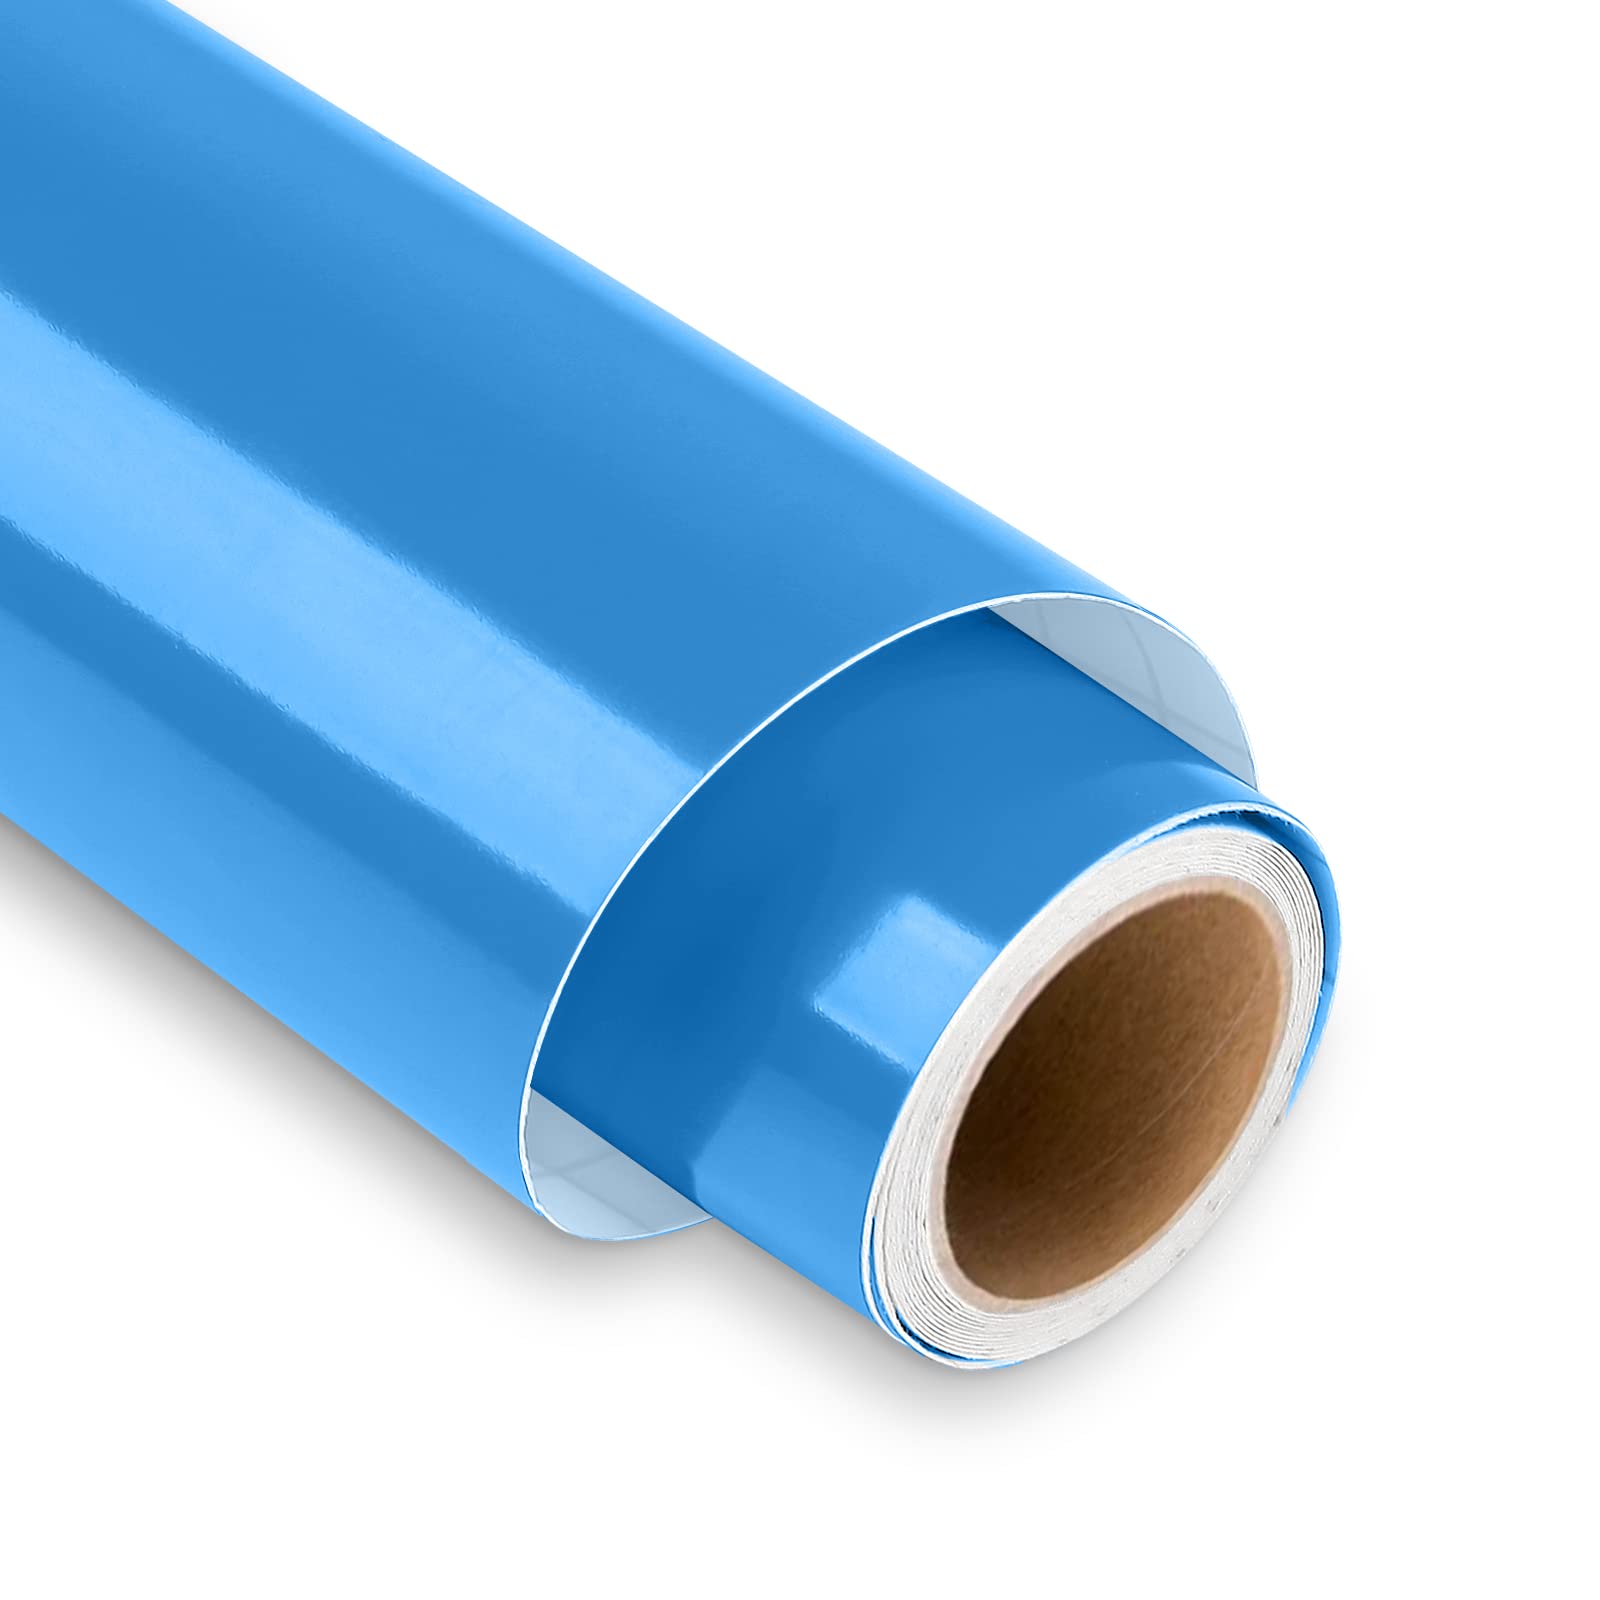 glossy Sky Blue Permanent Vinyl, 12 x 6 FT Adhesive Vinyl Roll - Lya Vinyl  glossy Sky Blue Adhesive Vinyl Roll for Silhouette an